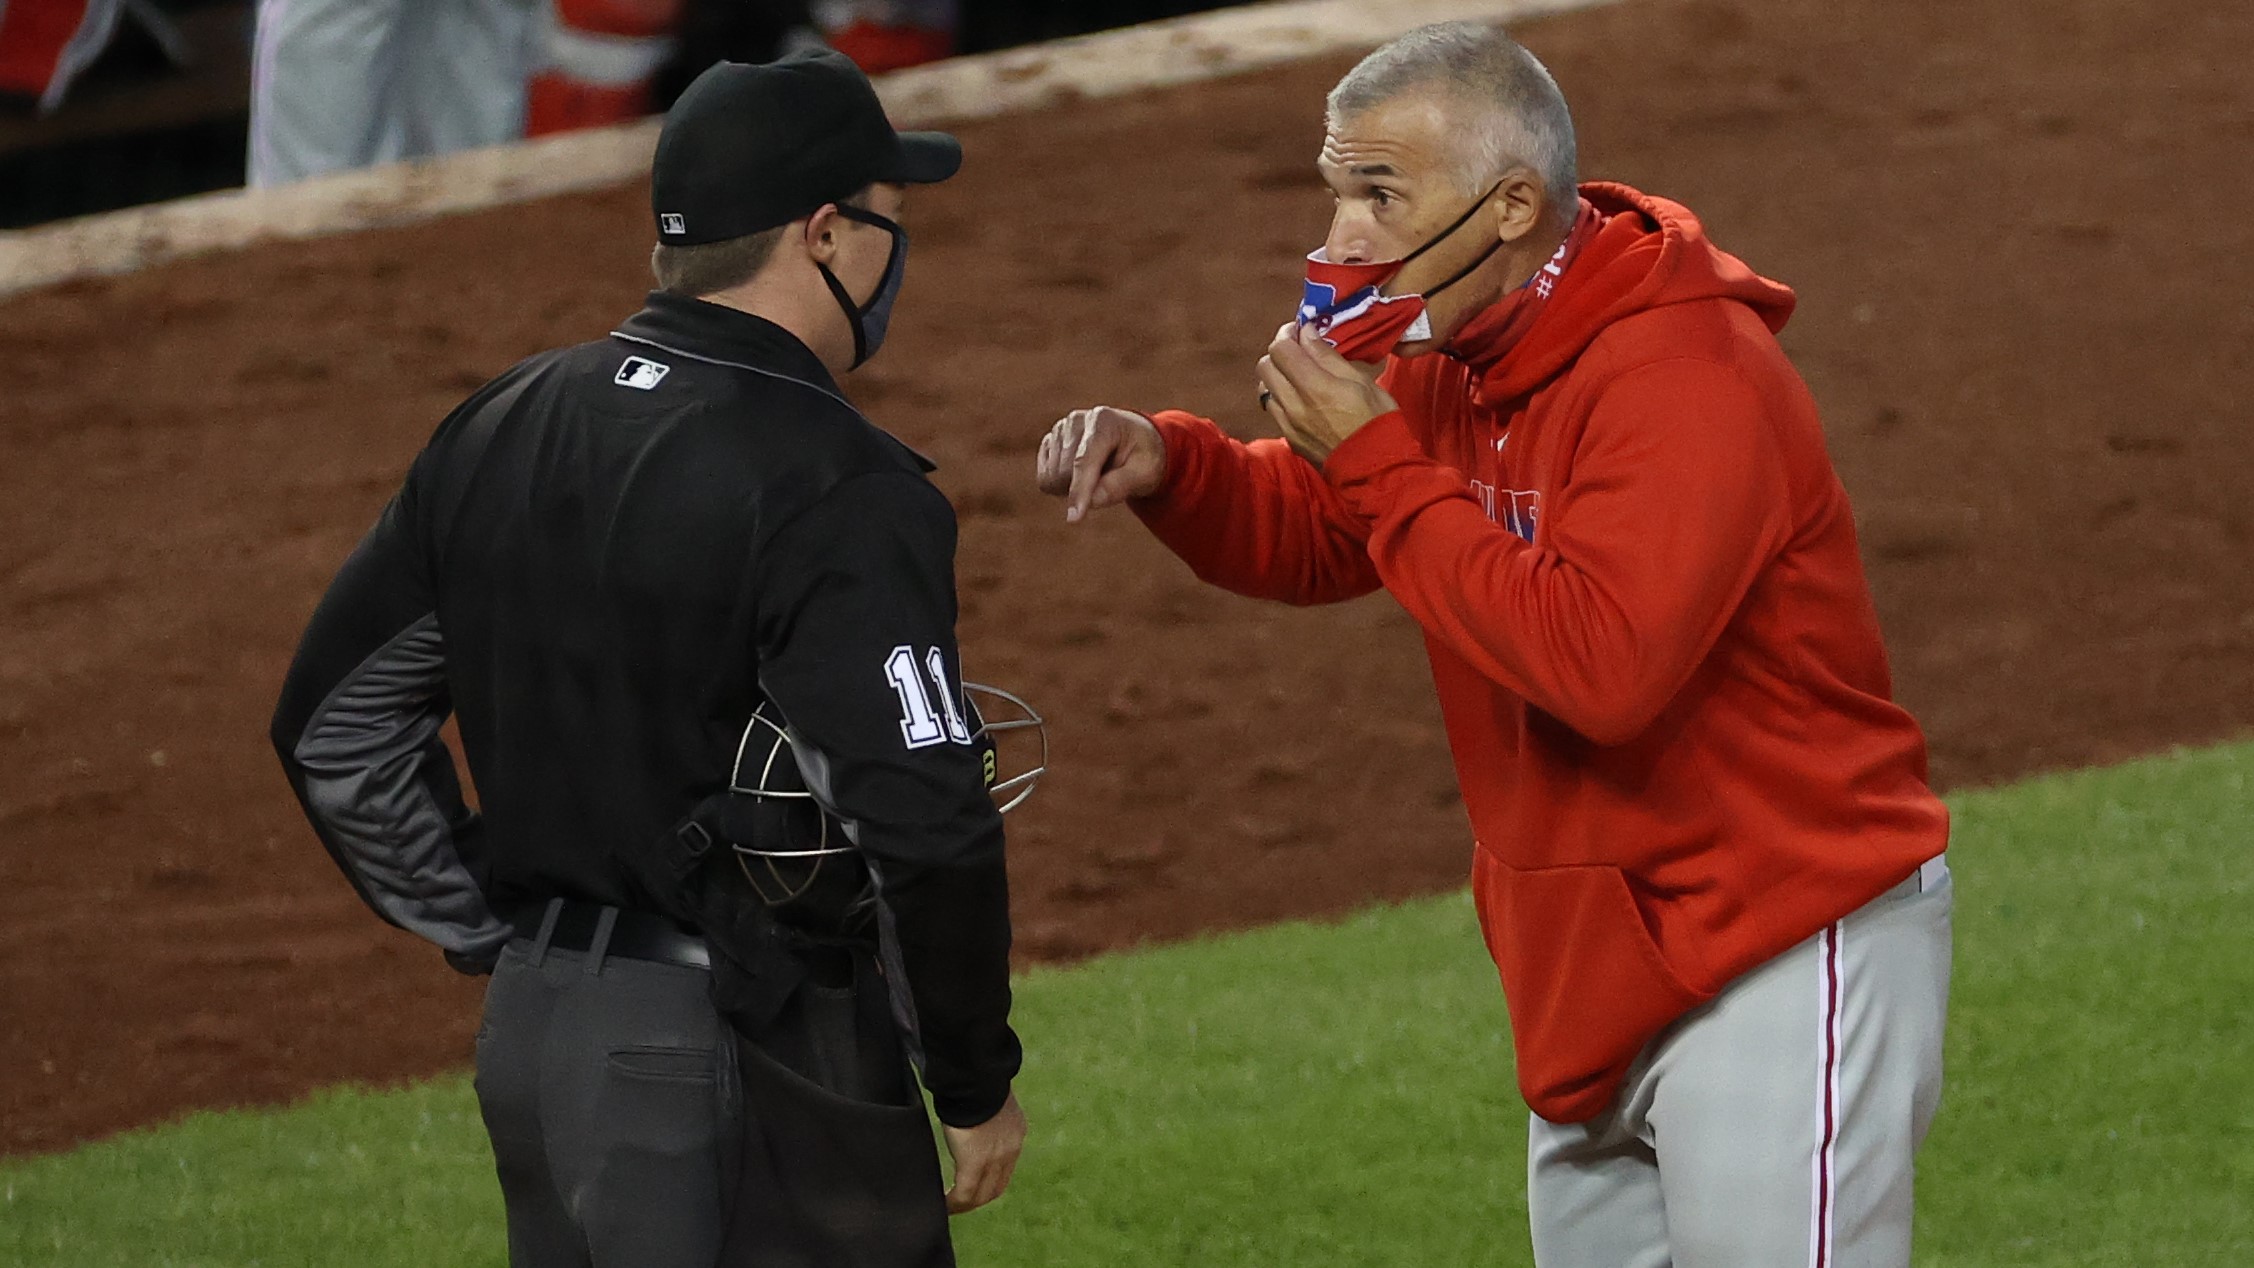 Joe Girardi almost punched an umpire in the face